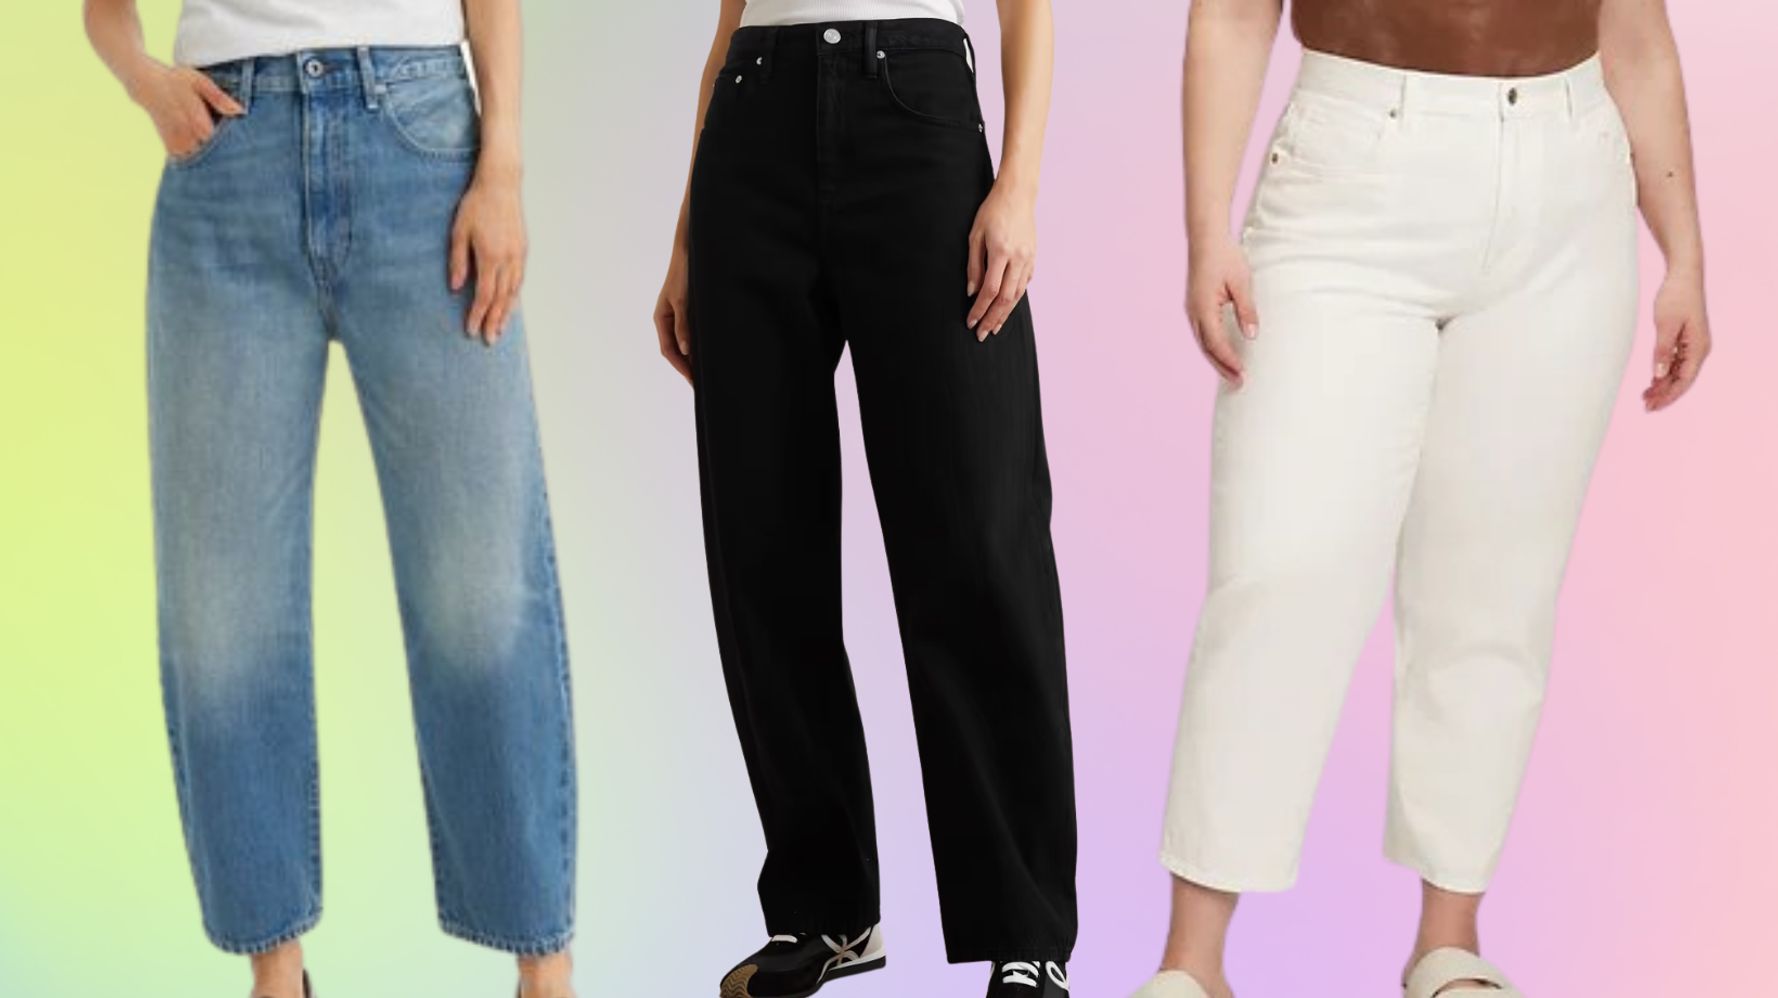 When will someone make jeans for us apple shape babes? I need more roo